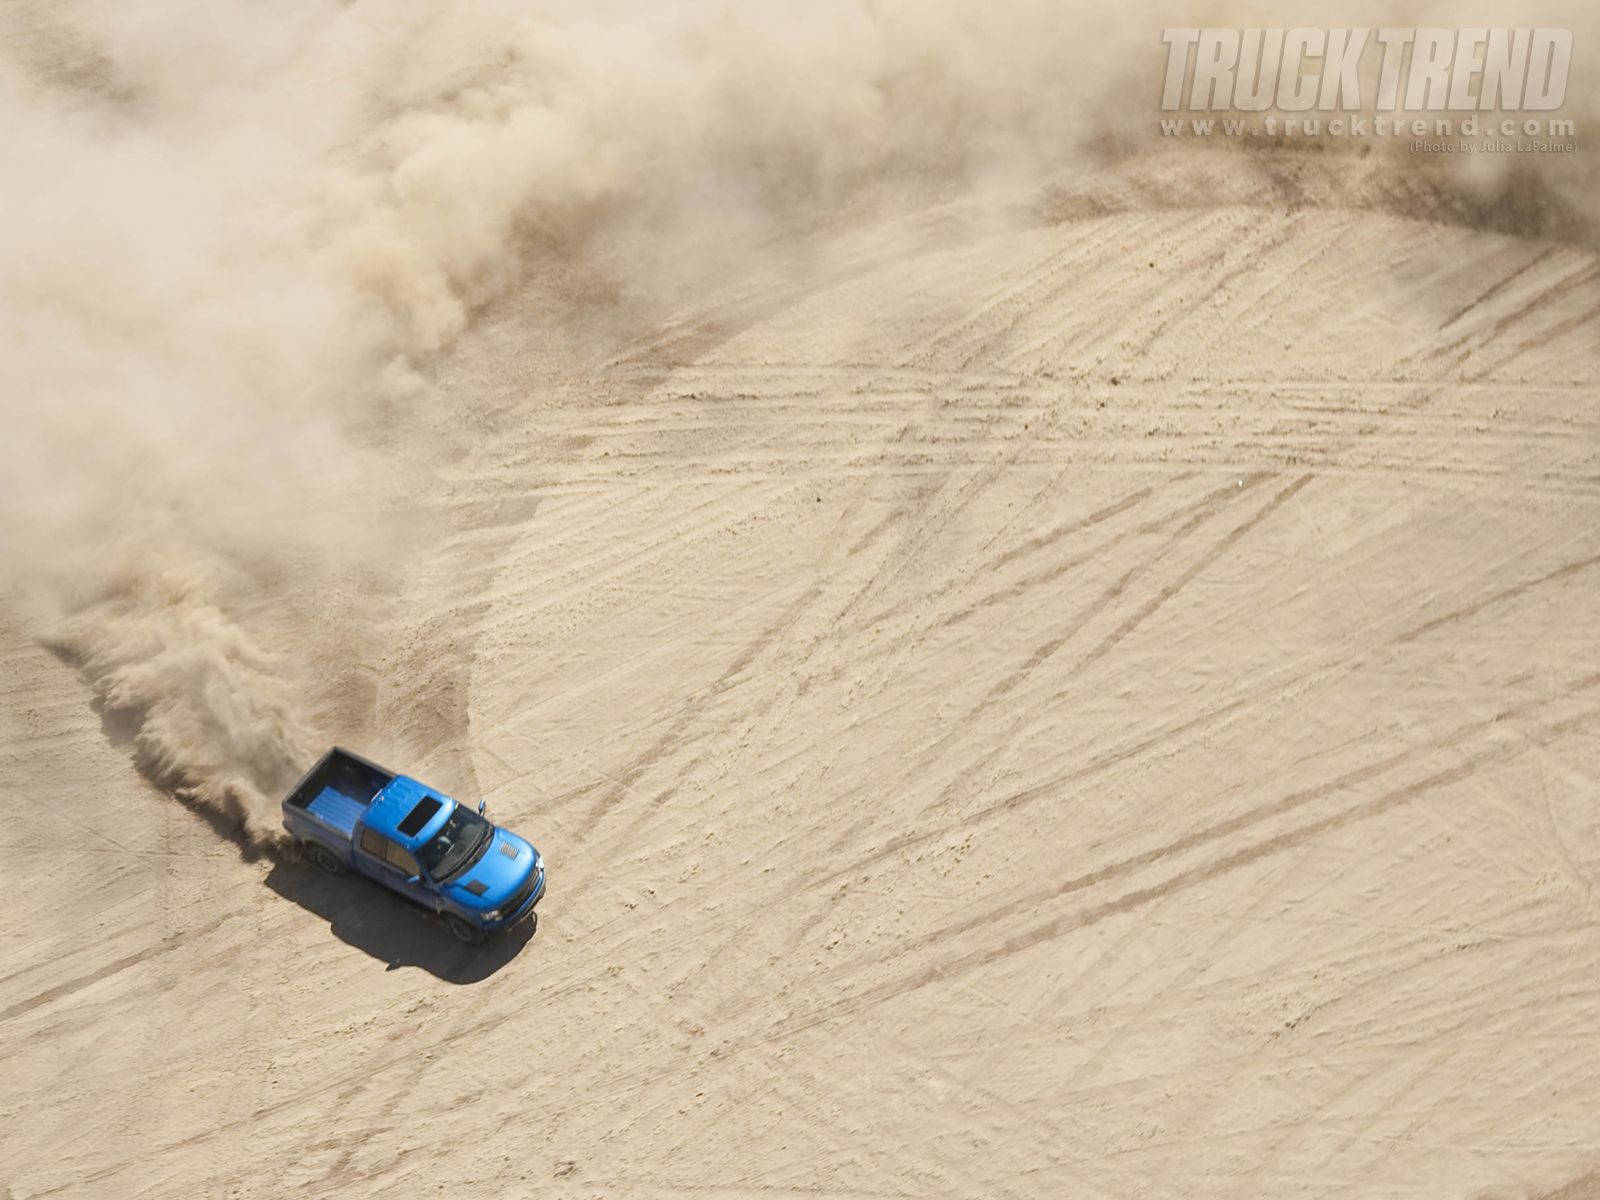 Power And Performance: The Ford Raptor In Drift